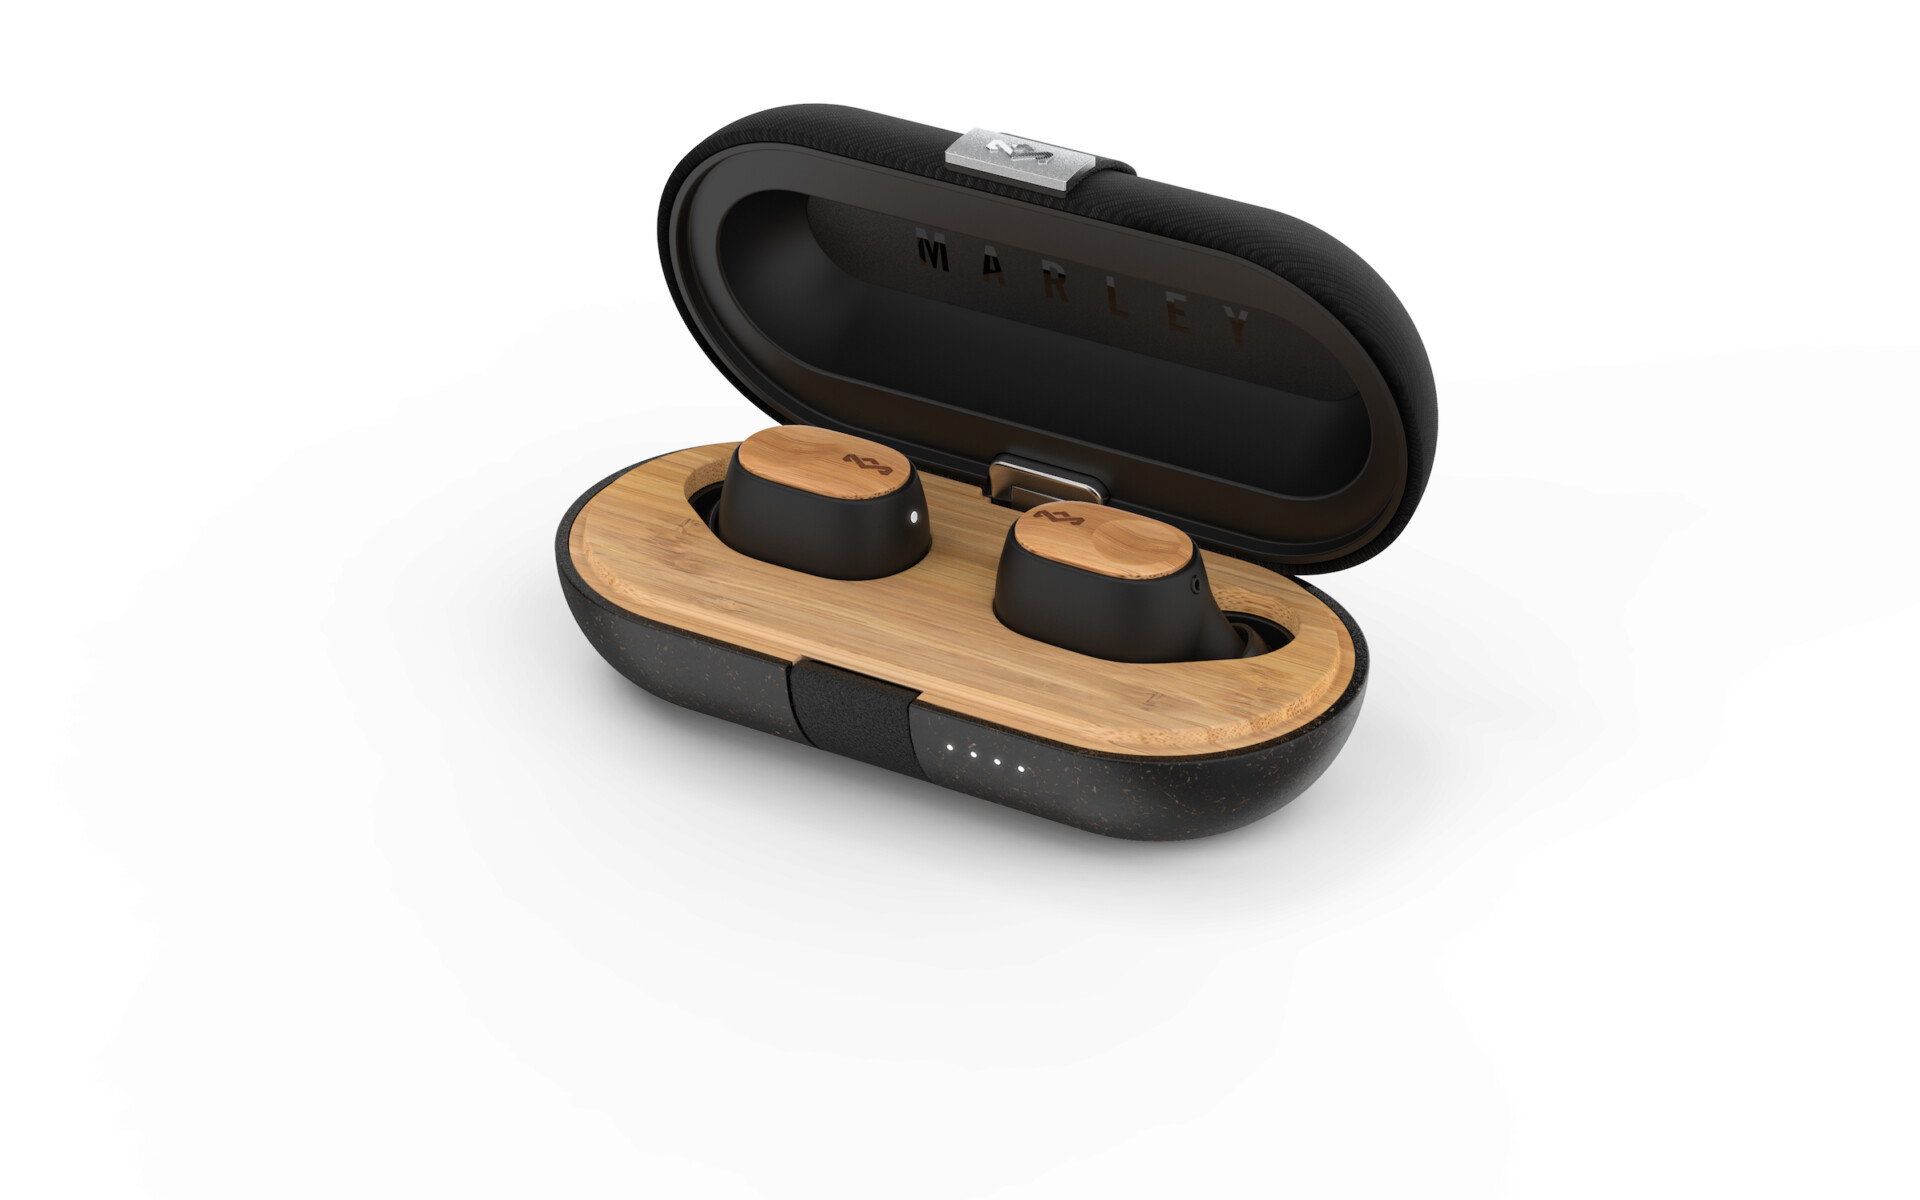 House of Marley Liberate Air true wireless earbuds in charging case on white background.